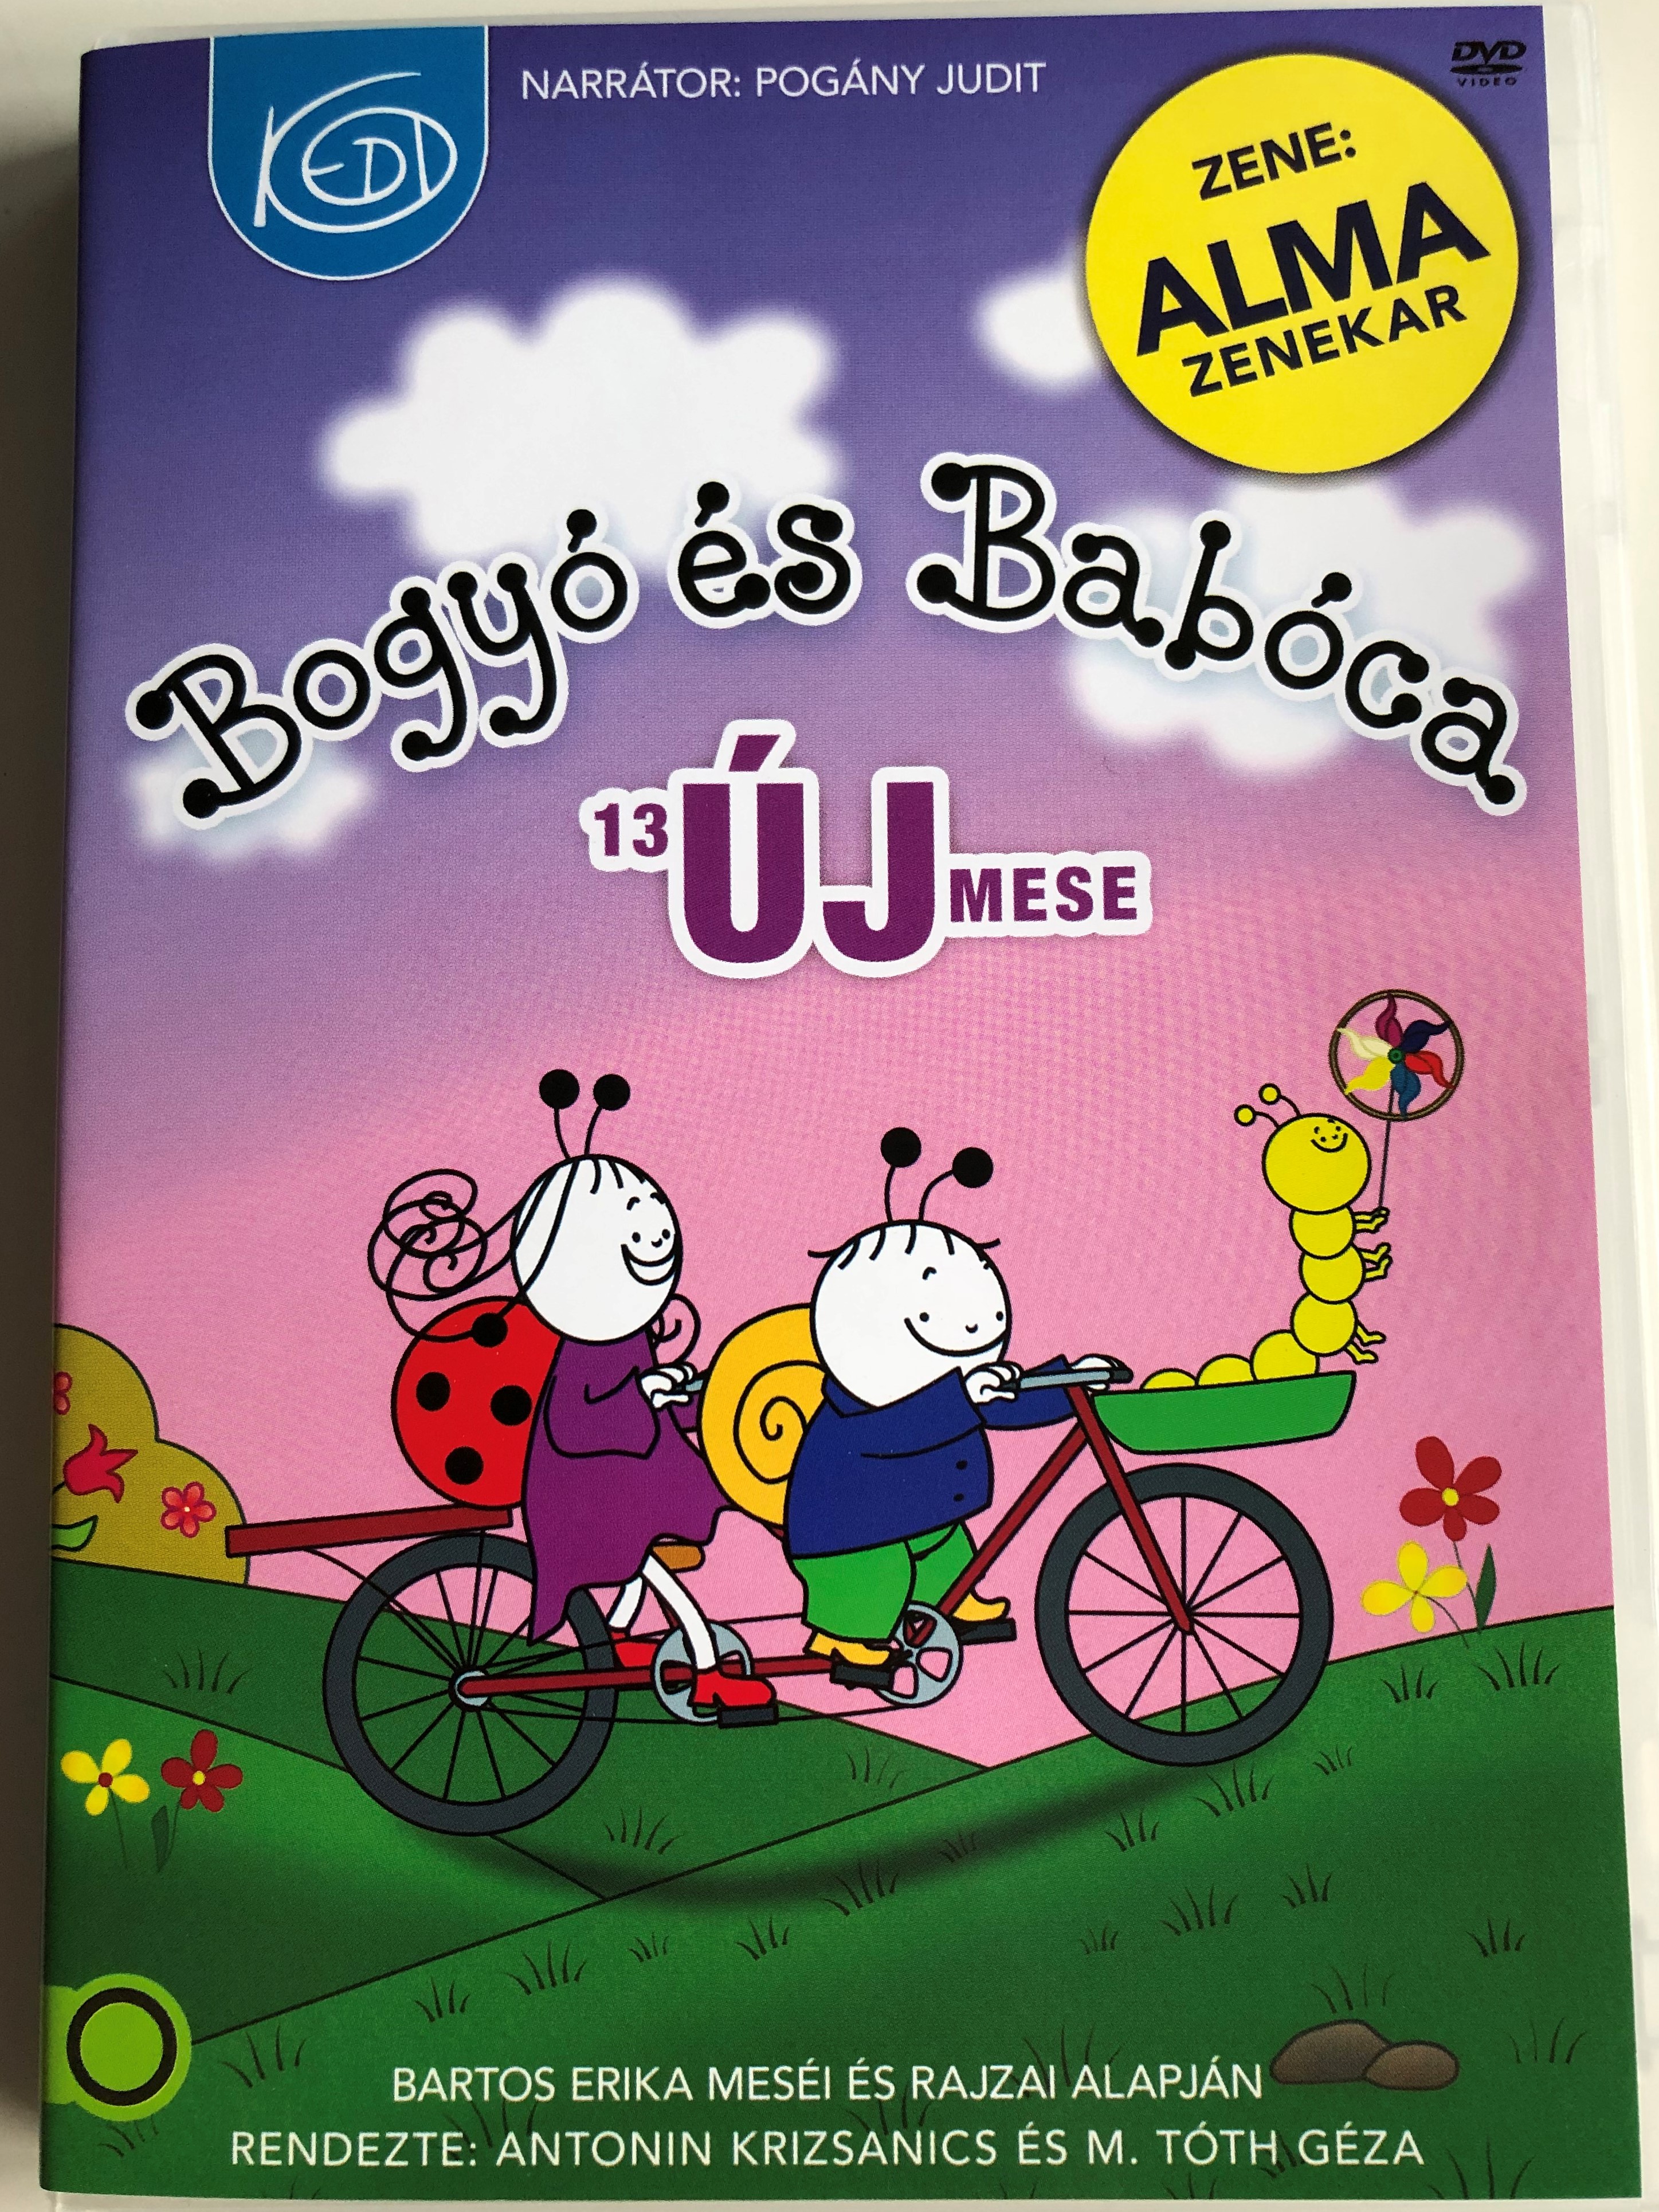 bogy-s-bab-ca-dvd-2011-2.-r-sz-directed-by-antonin-krizsanics-narrated-by-poh-ny-judit-13-j-mese-13-new-hungarian-stories-for-children-by-bartos-erika-1-.jpg